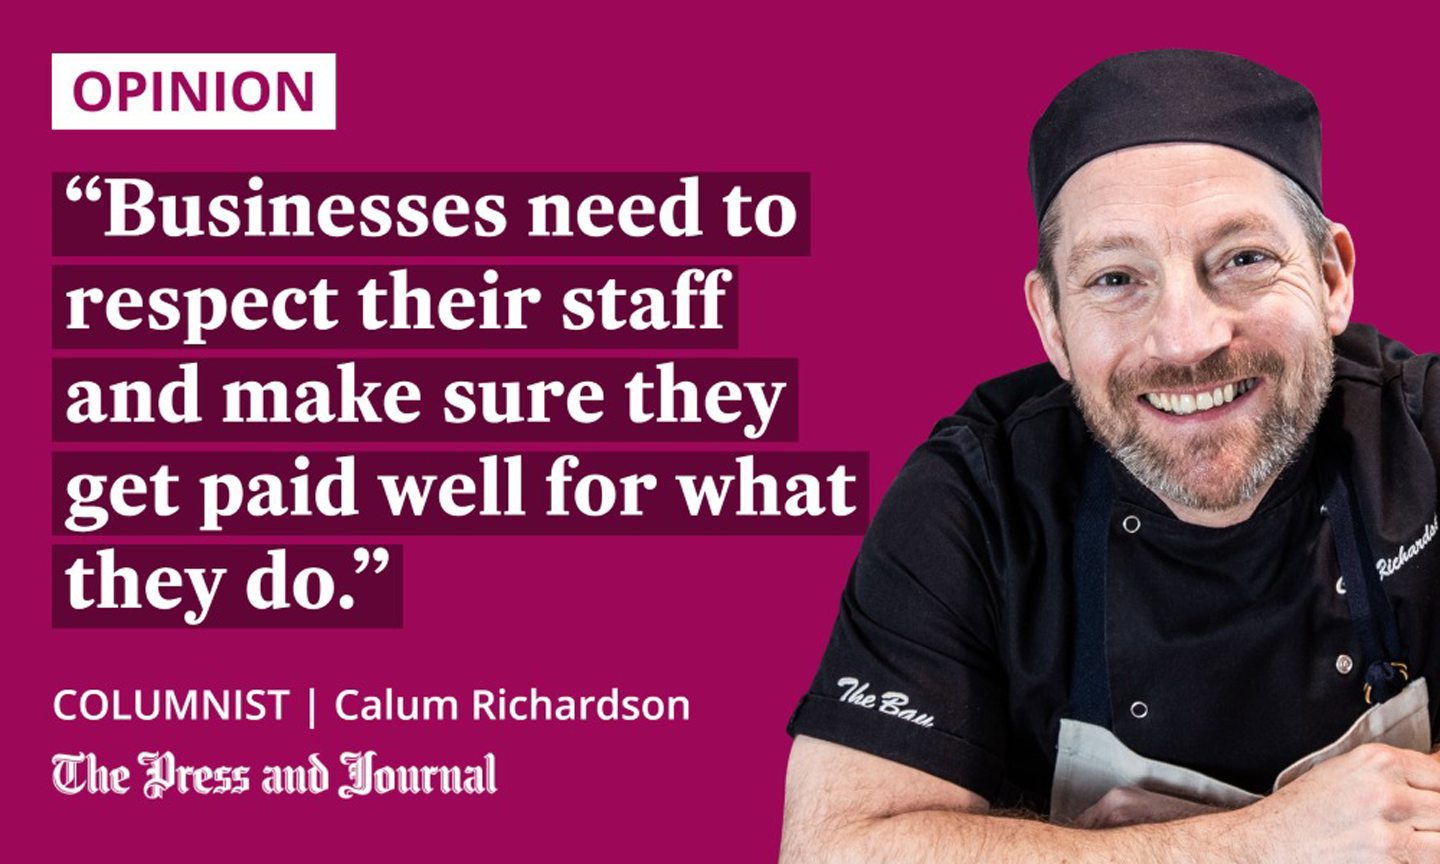 Columnist Calum Richardson speaks about employee mental health: "Businesses need to respect their staff and make sure they get paid well for what they do."